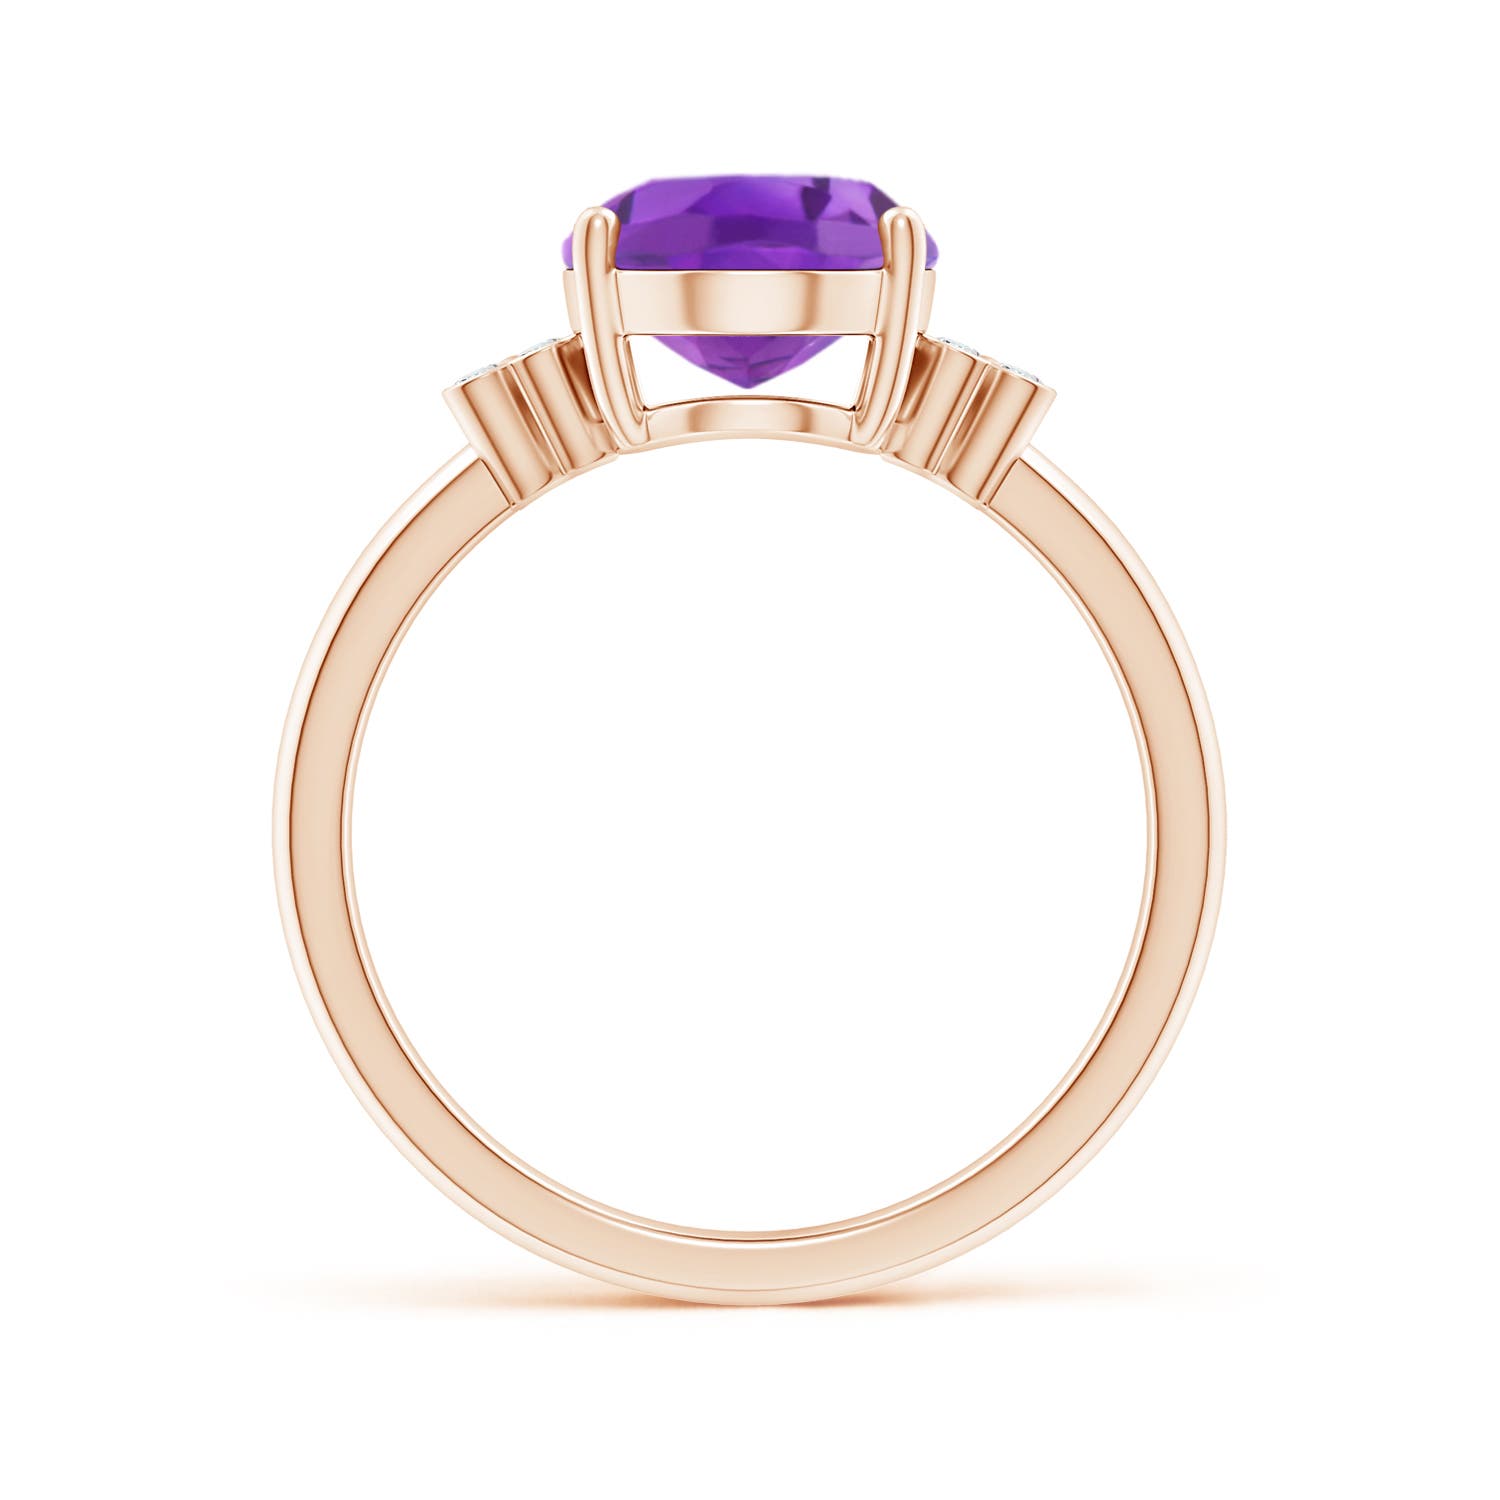 AA- Amethyst / 2.36 CT / 14 KT Rose Gold